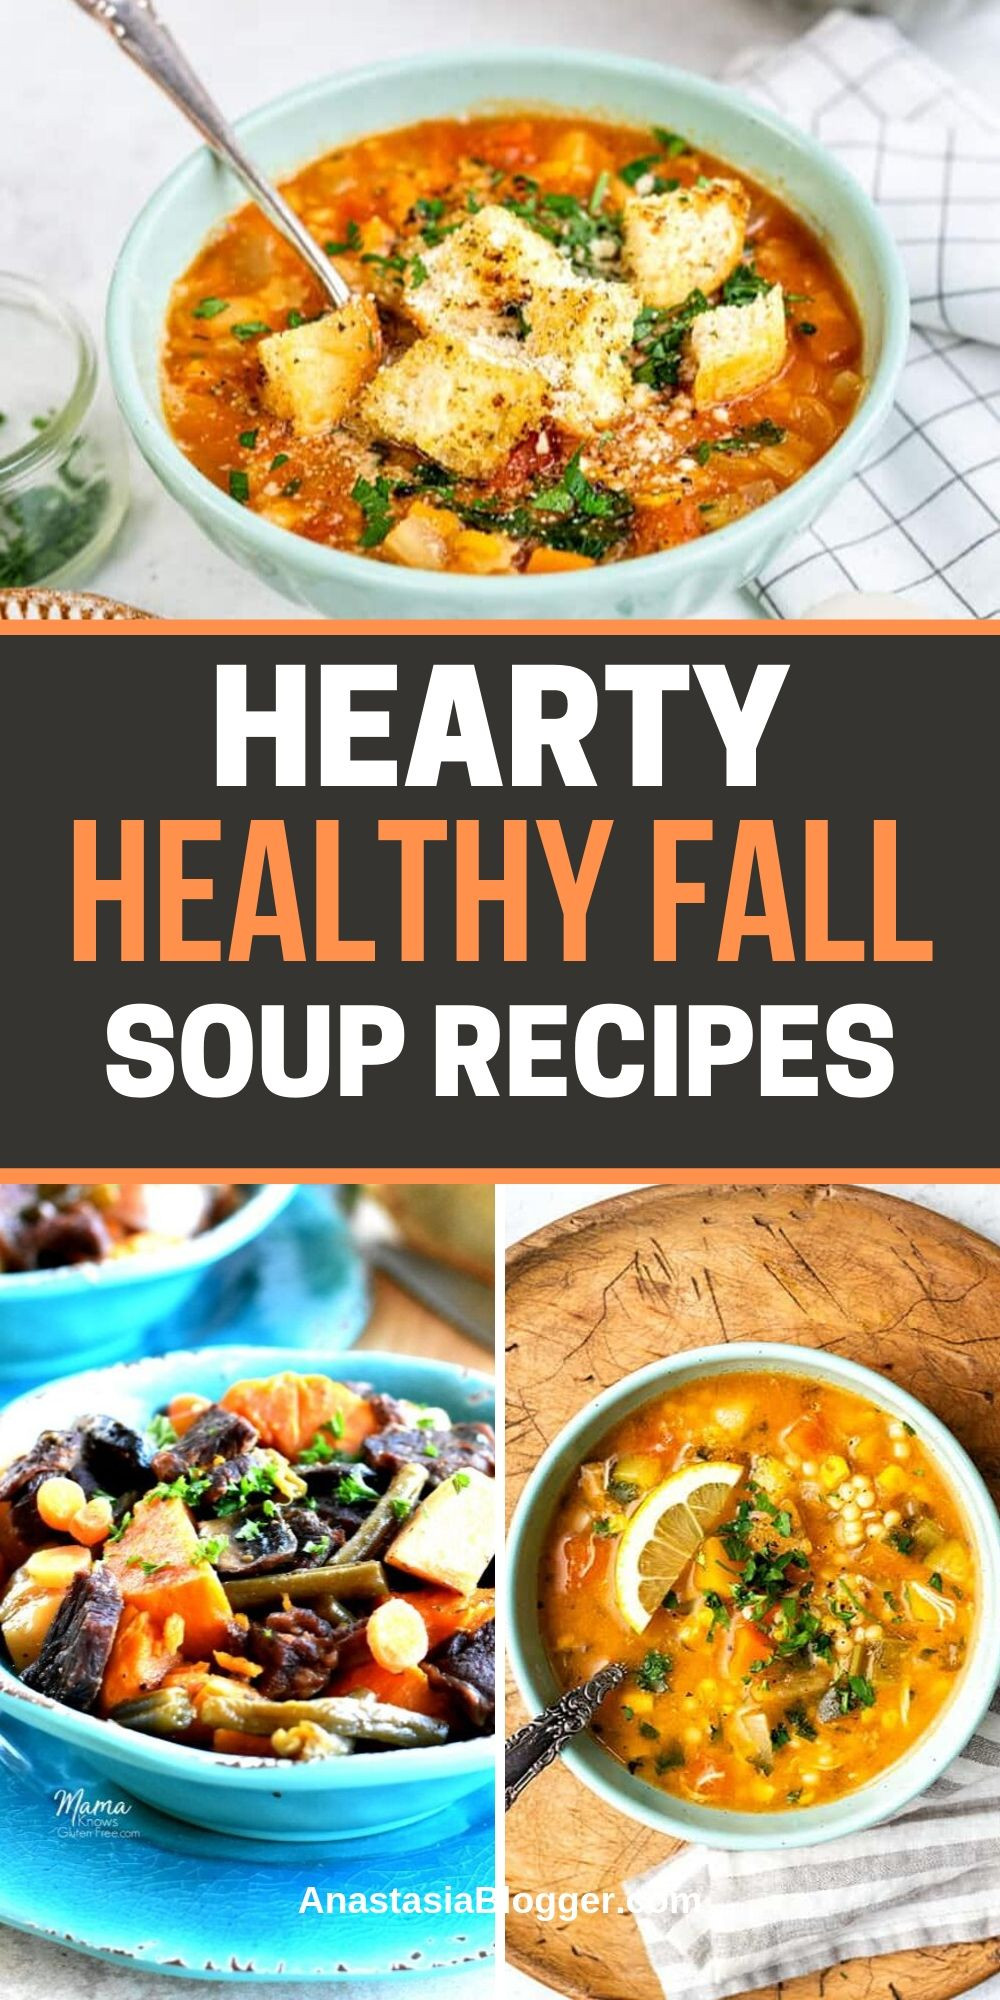 Healthy Fall Soups
 15 Healthy Fall Soups Easy Fall Soup Recipes for Autumn